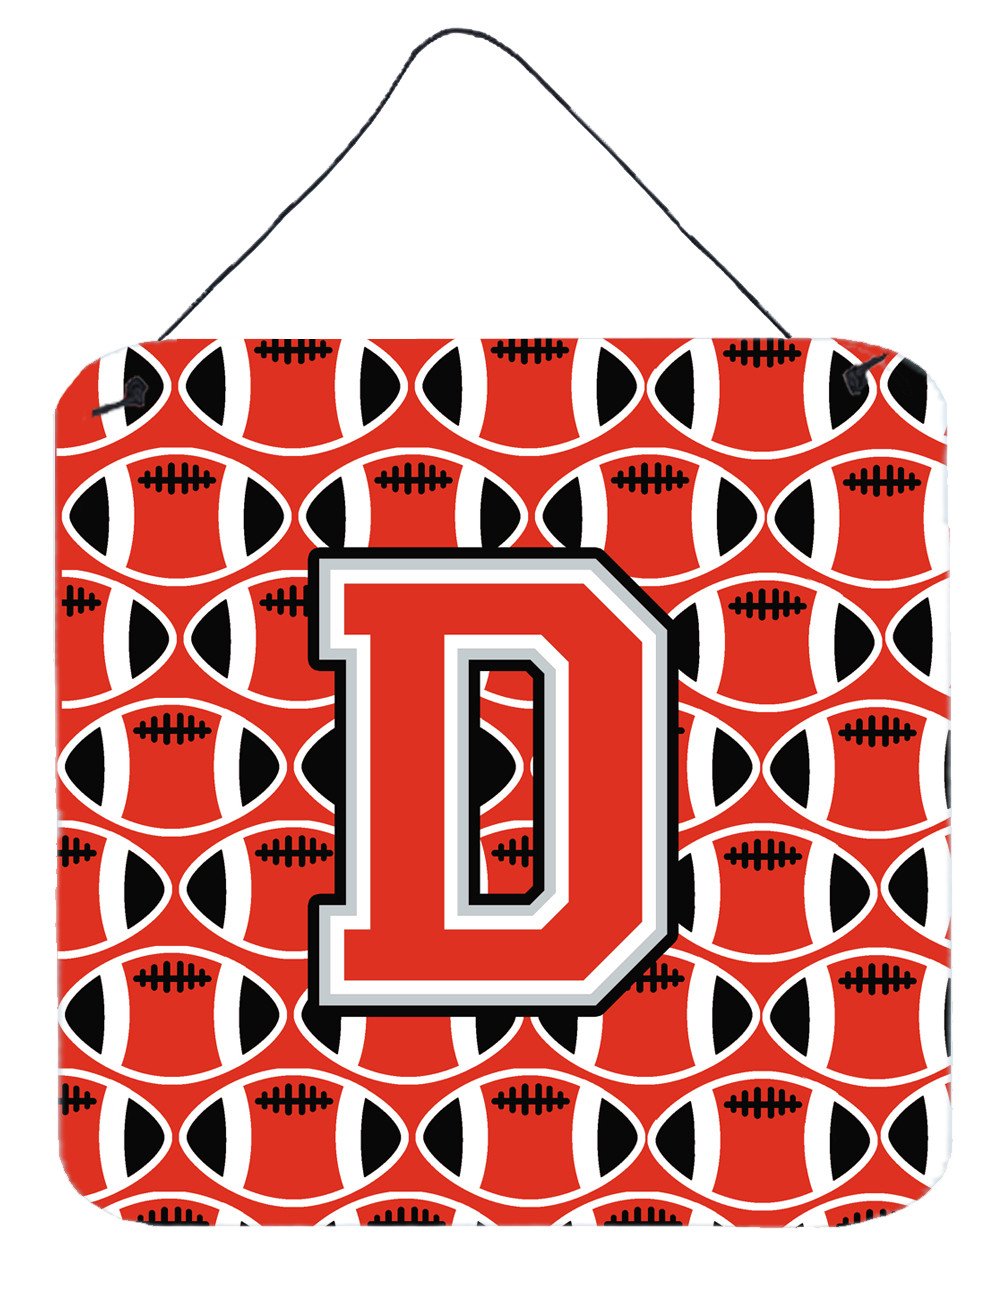 Letter D Football Scarlet and Grey Wall or Door Hanging Prints CJ1067-DDS66 by Caroline's Treasures